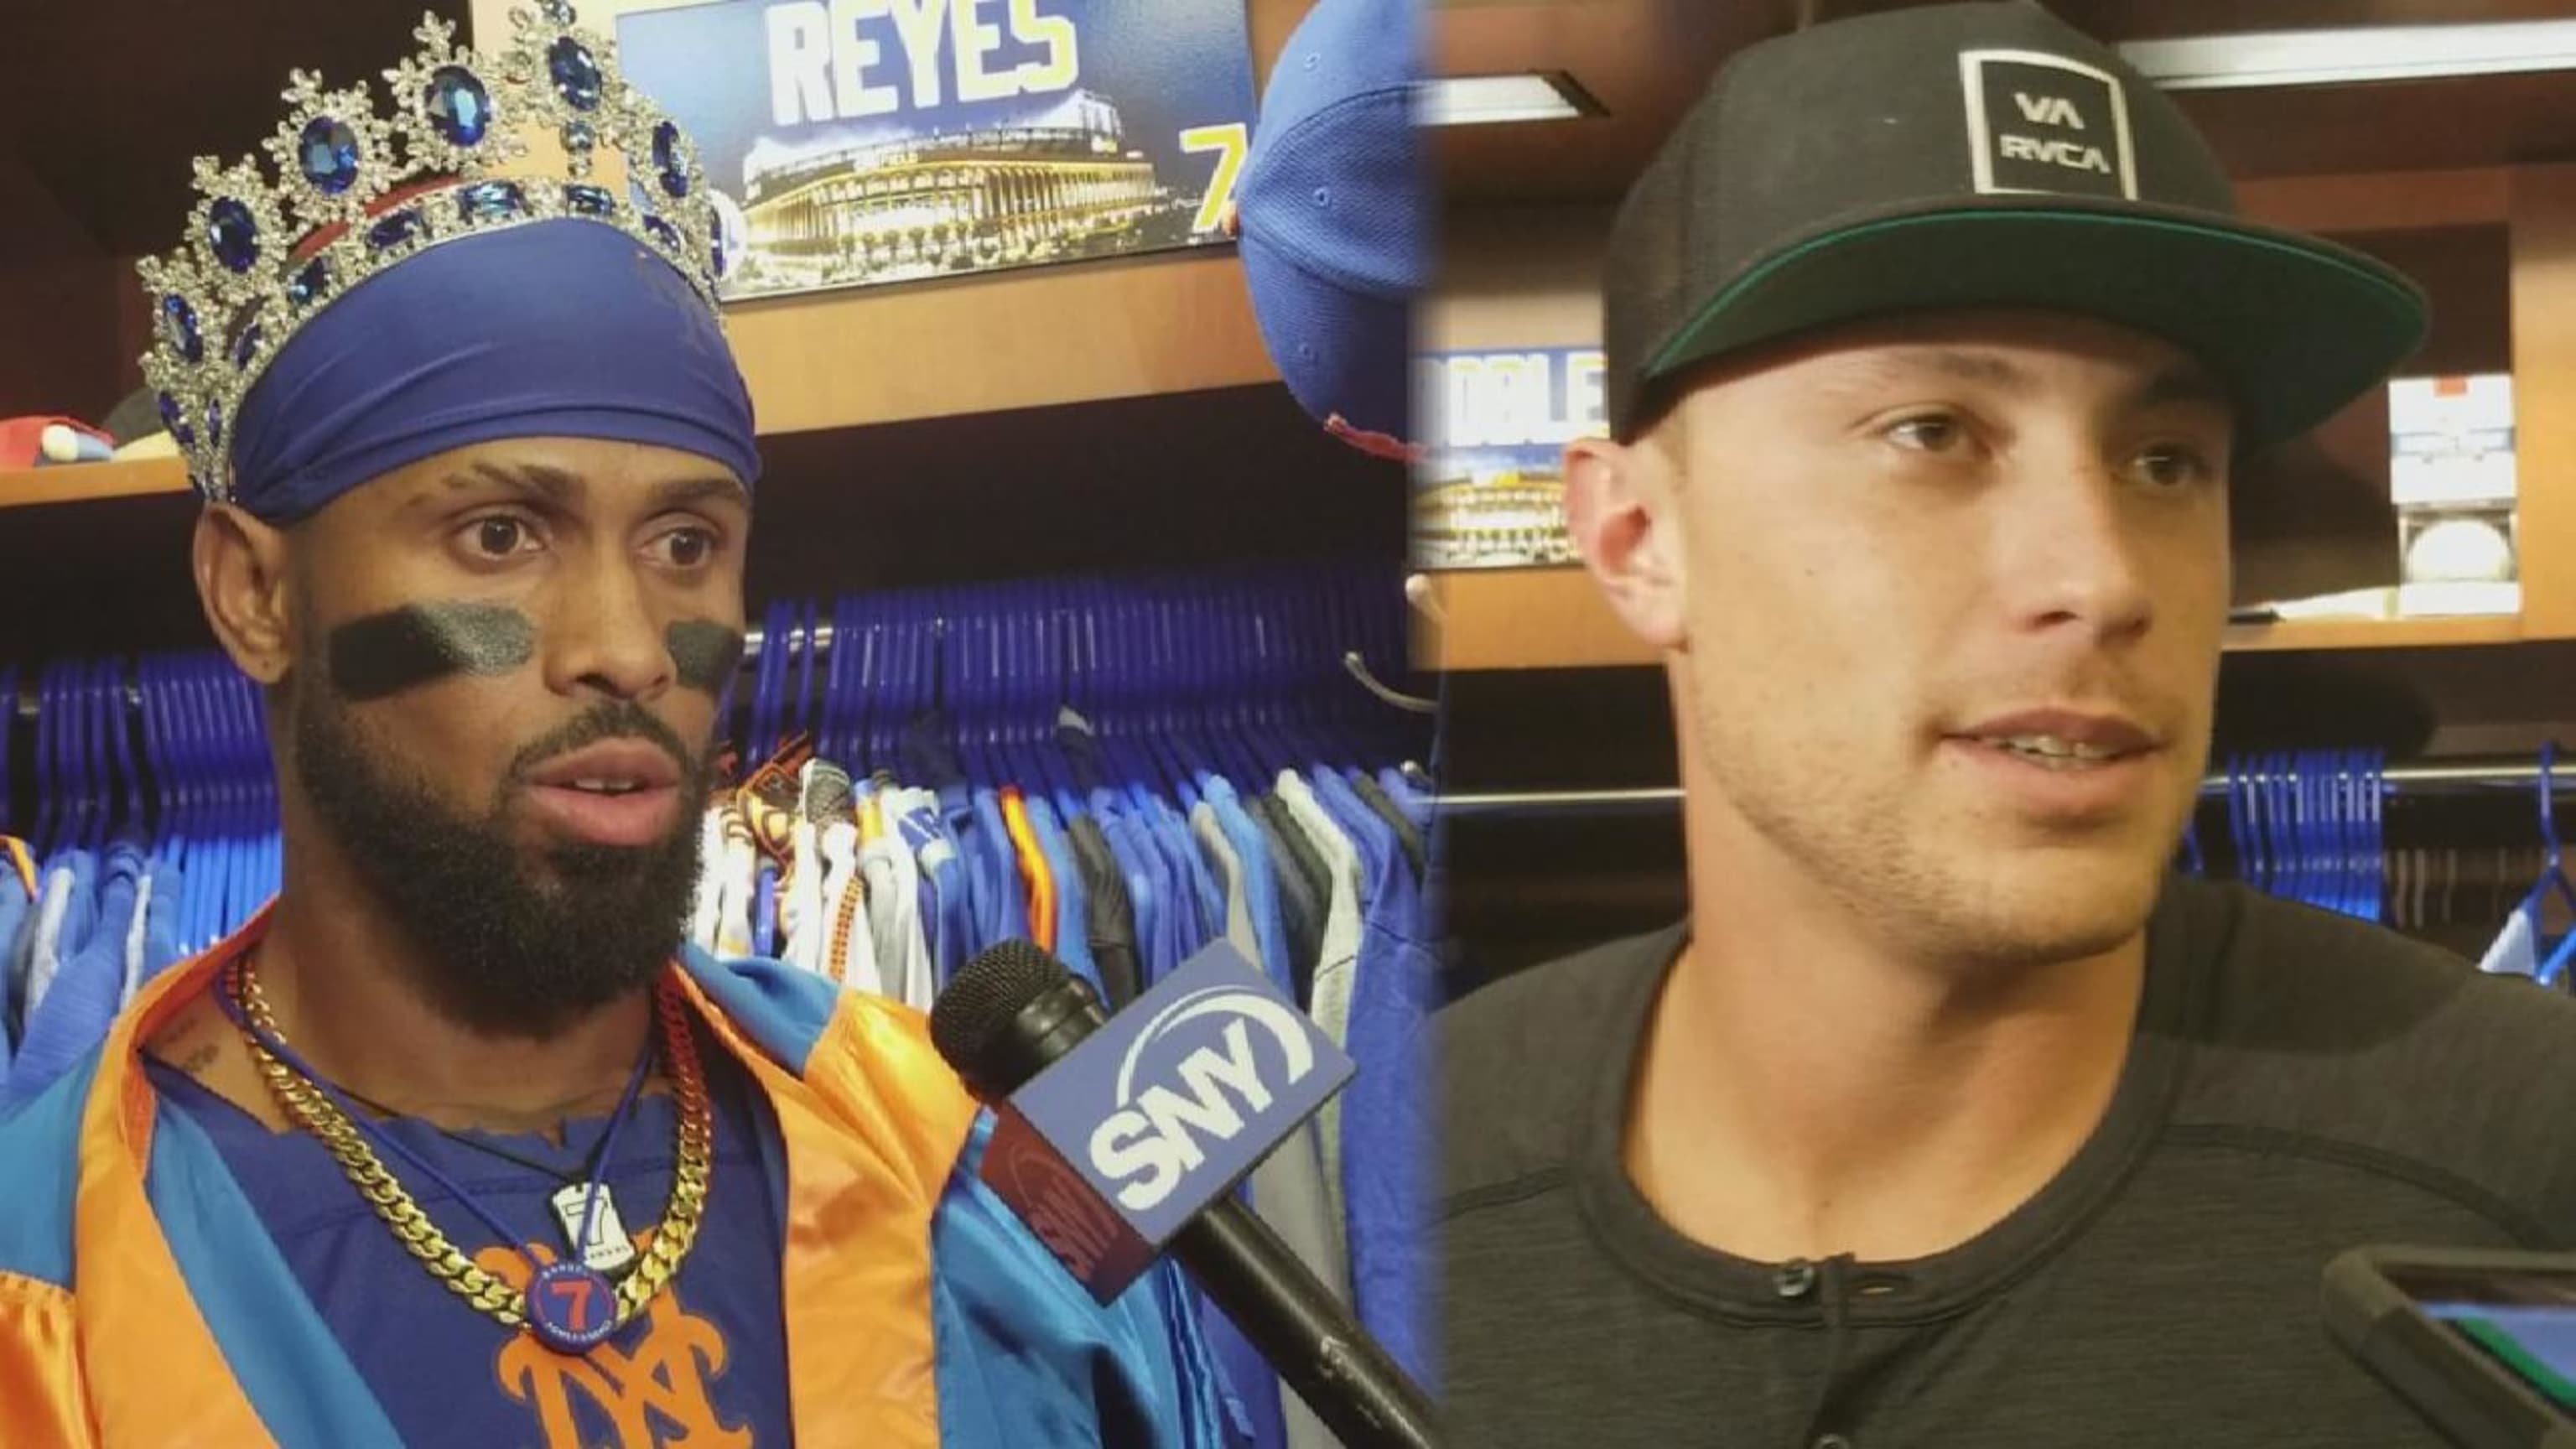 Mets manager Terry Collins discusses possible role for Jose Reyes